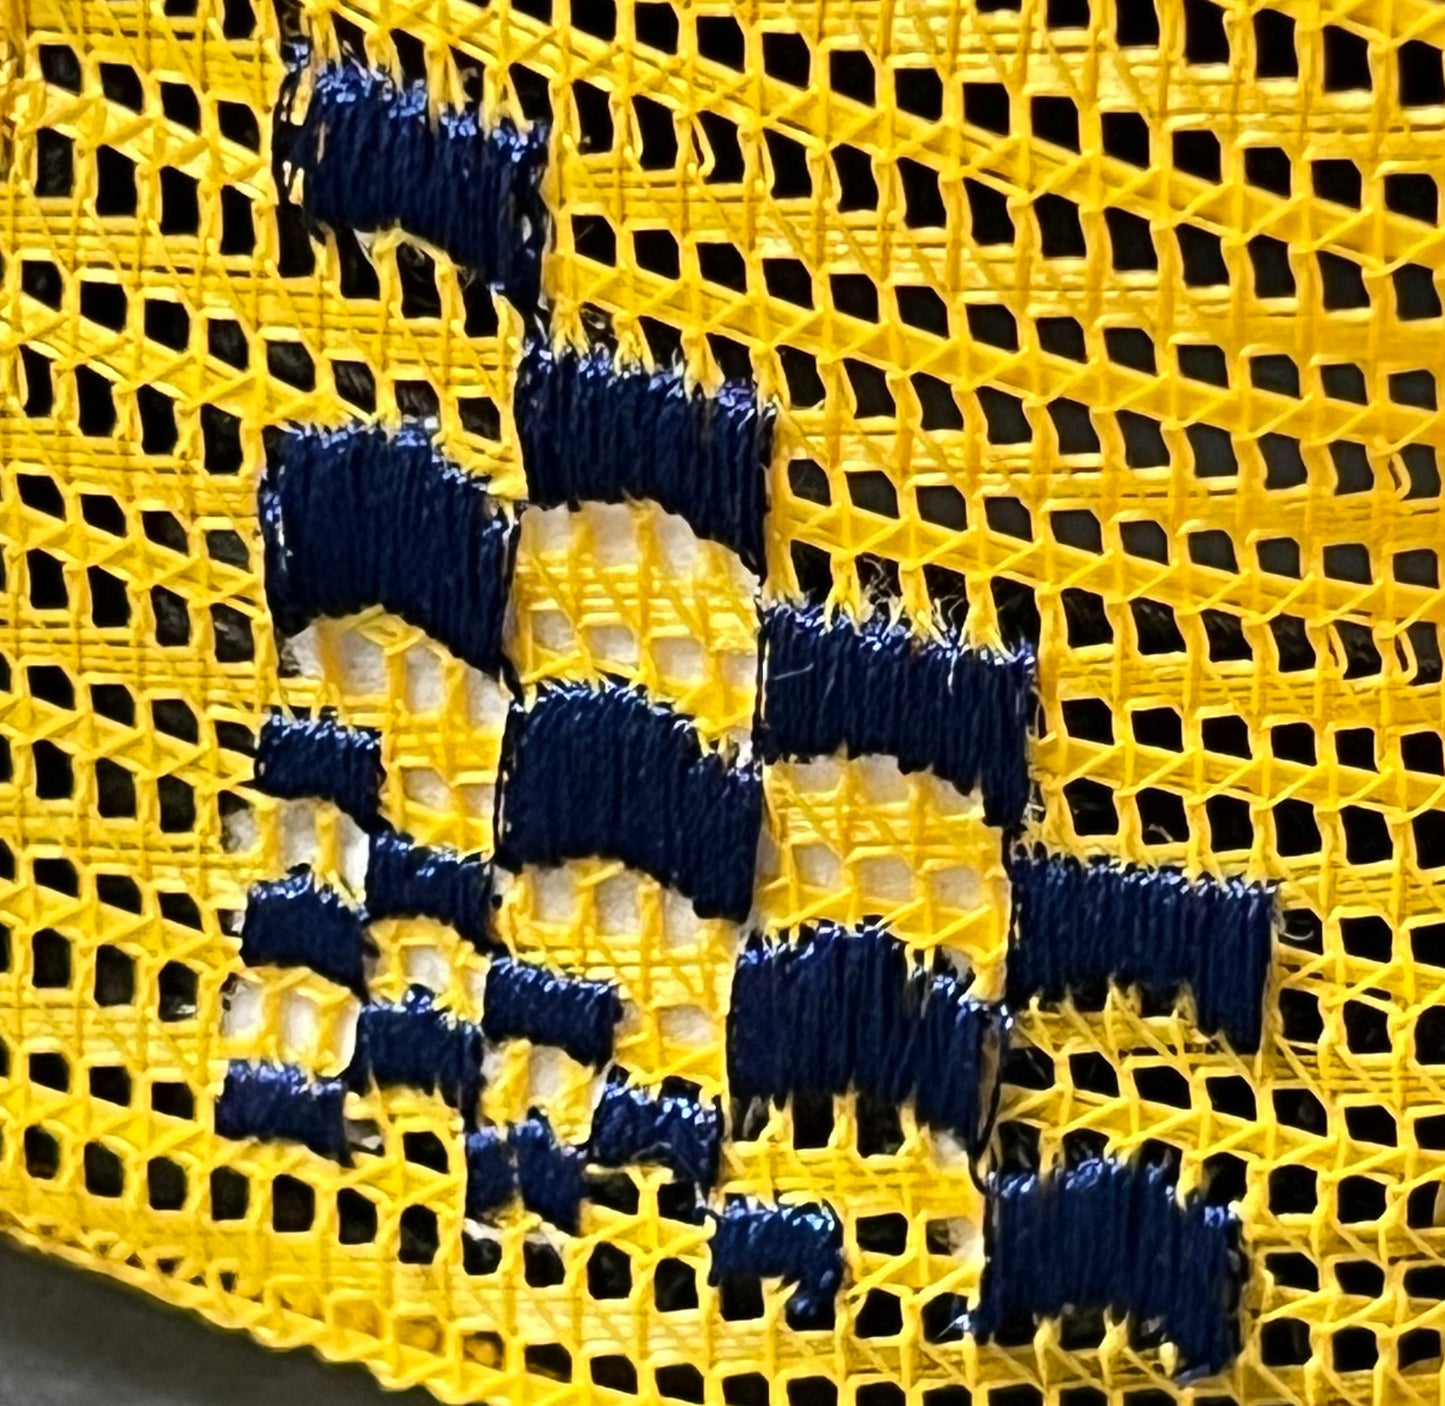 A close up of a yellow and blue fabric with embroidered RHUDE branding.